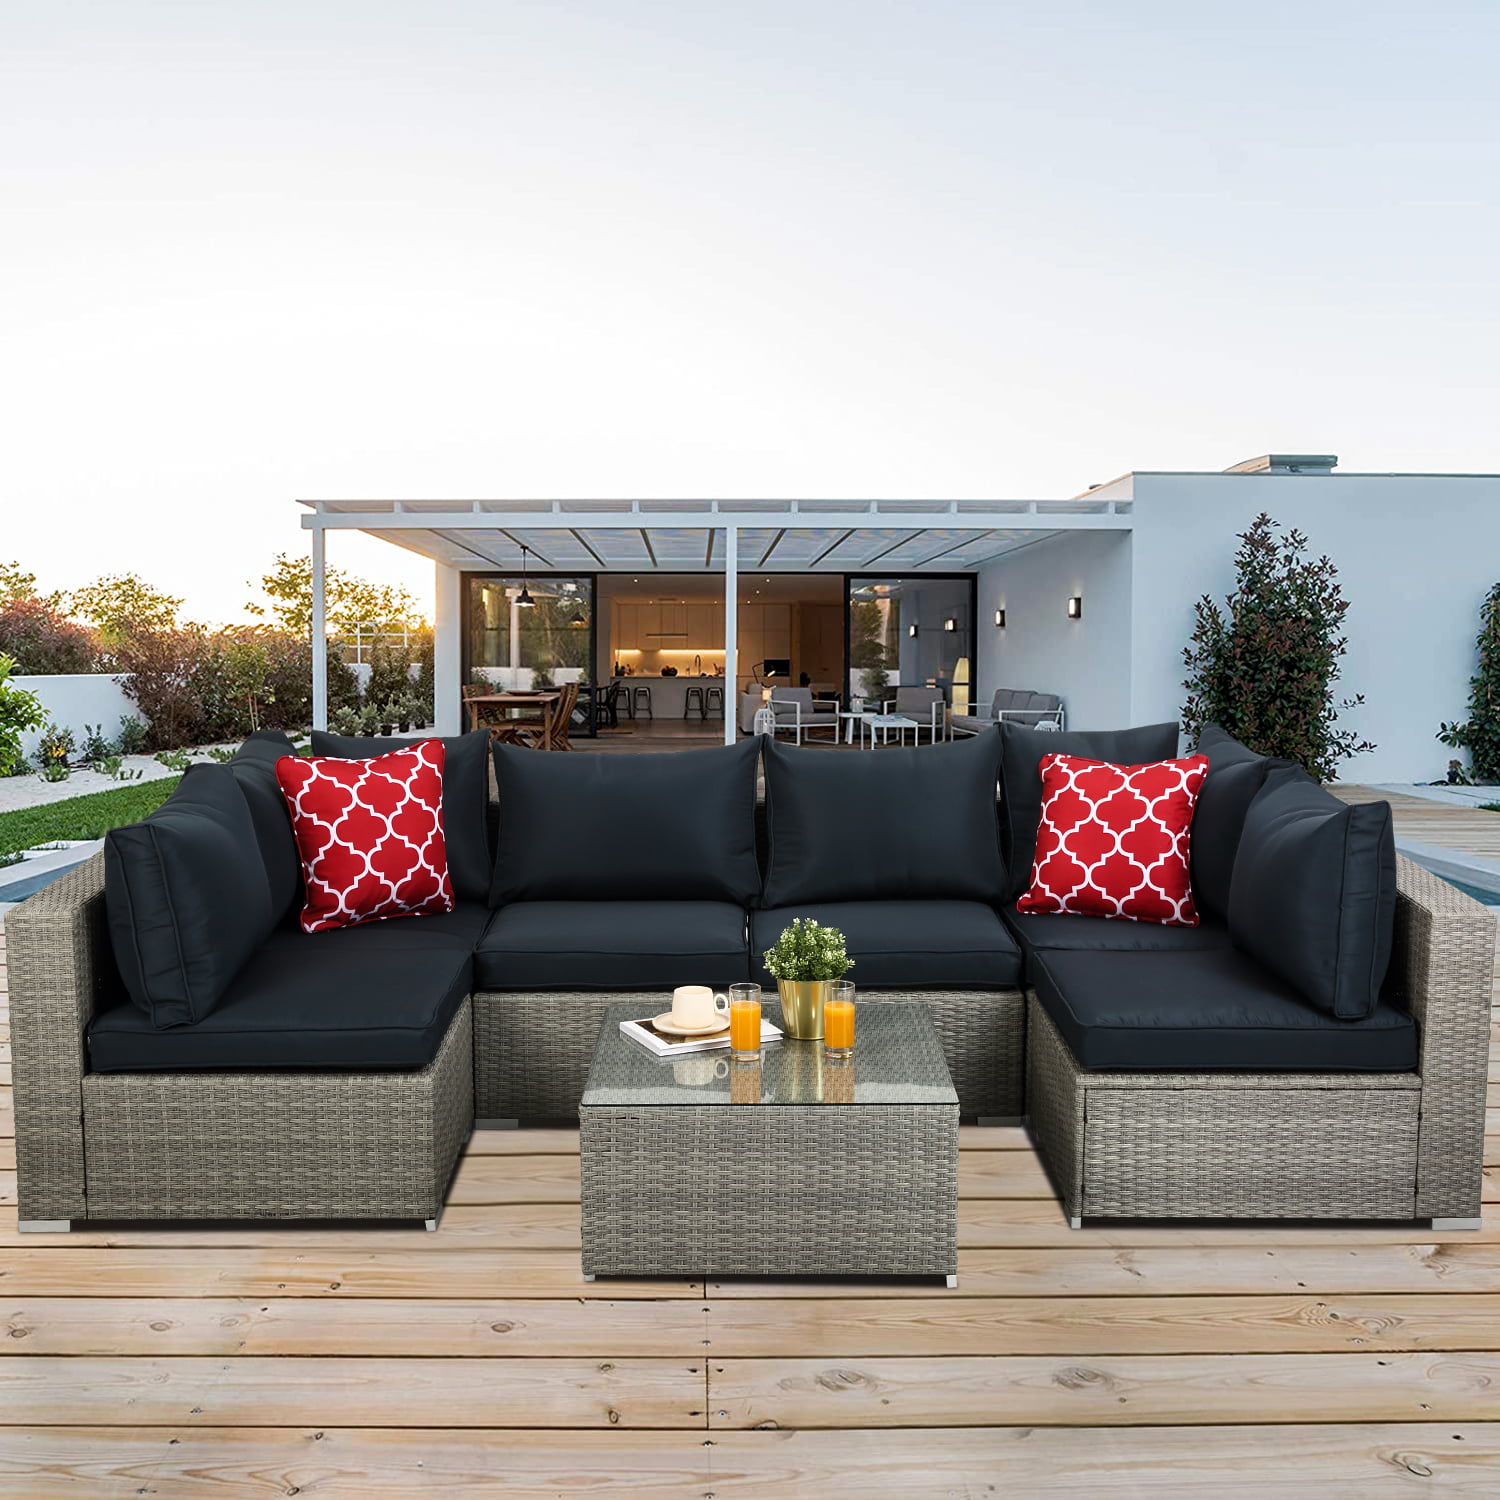 2 PCS Patio Sofa Conversation Sectional Checkered Wicker Rattan Seating Outdoor 